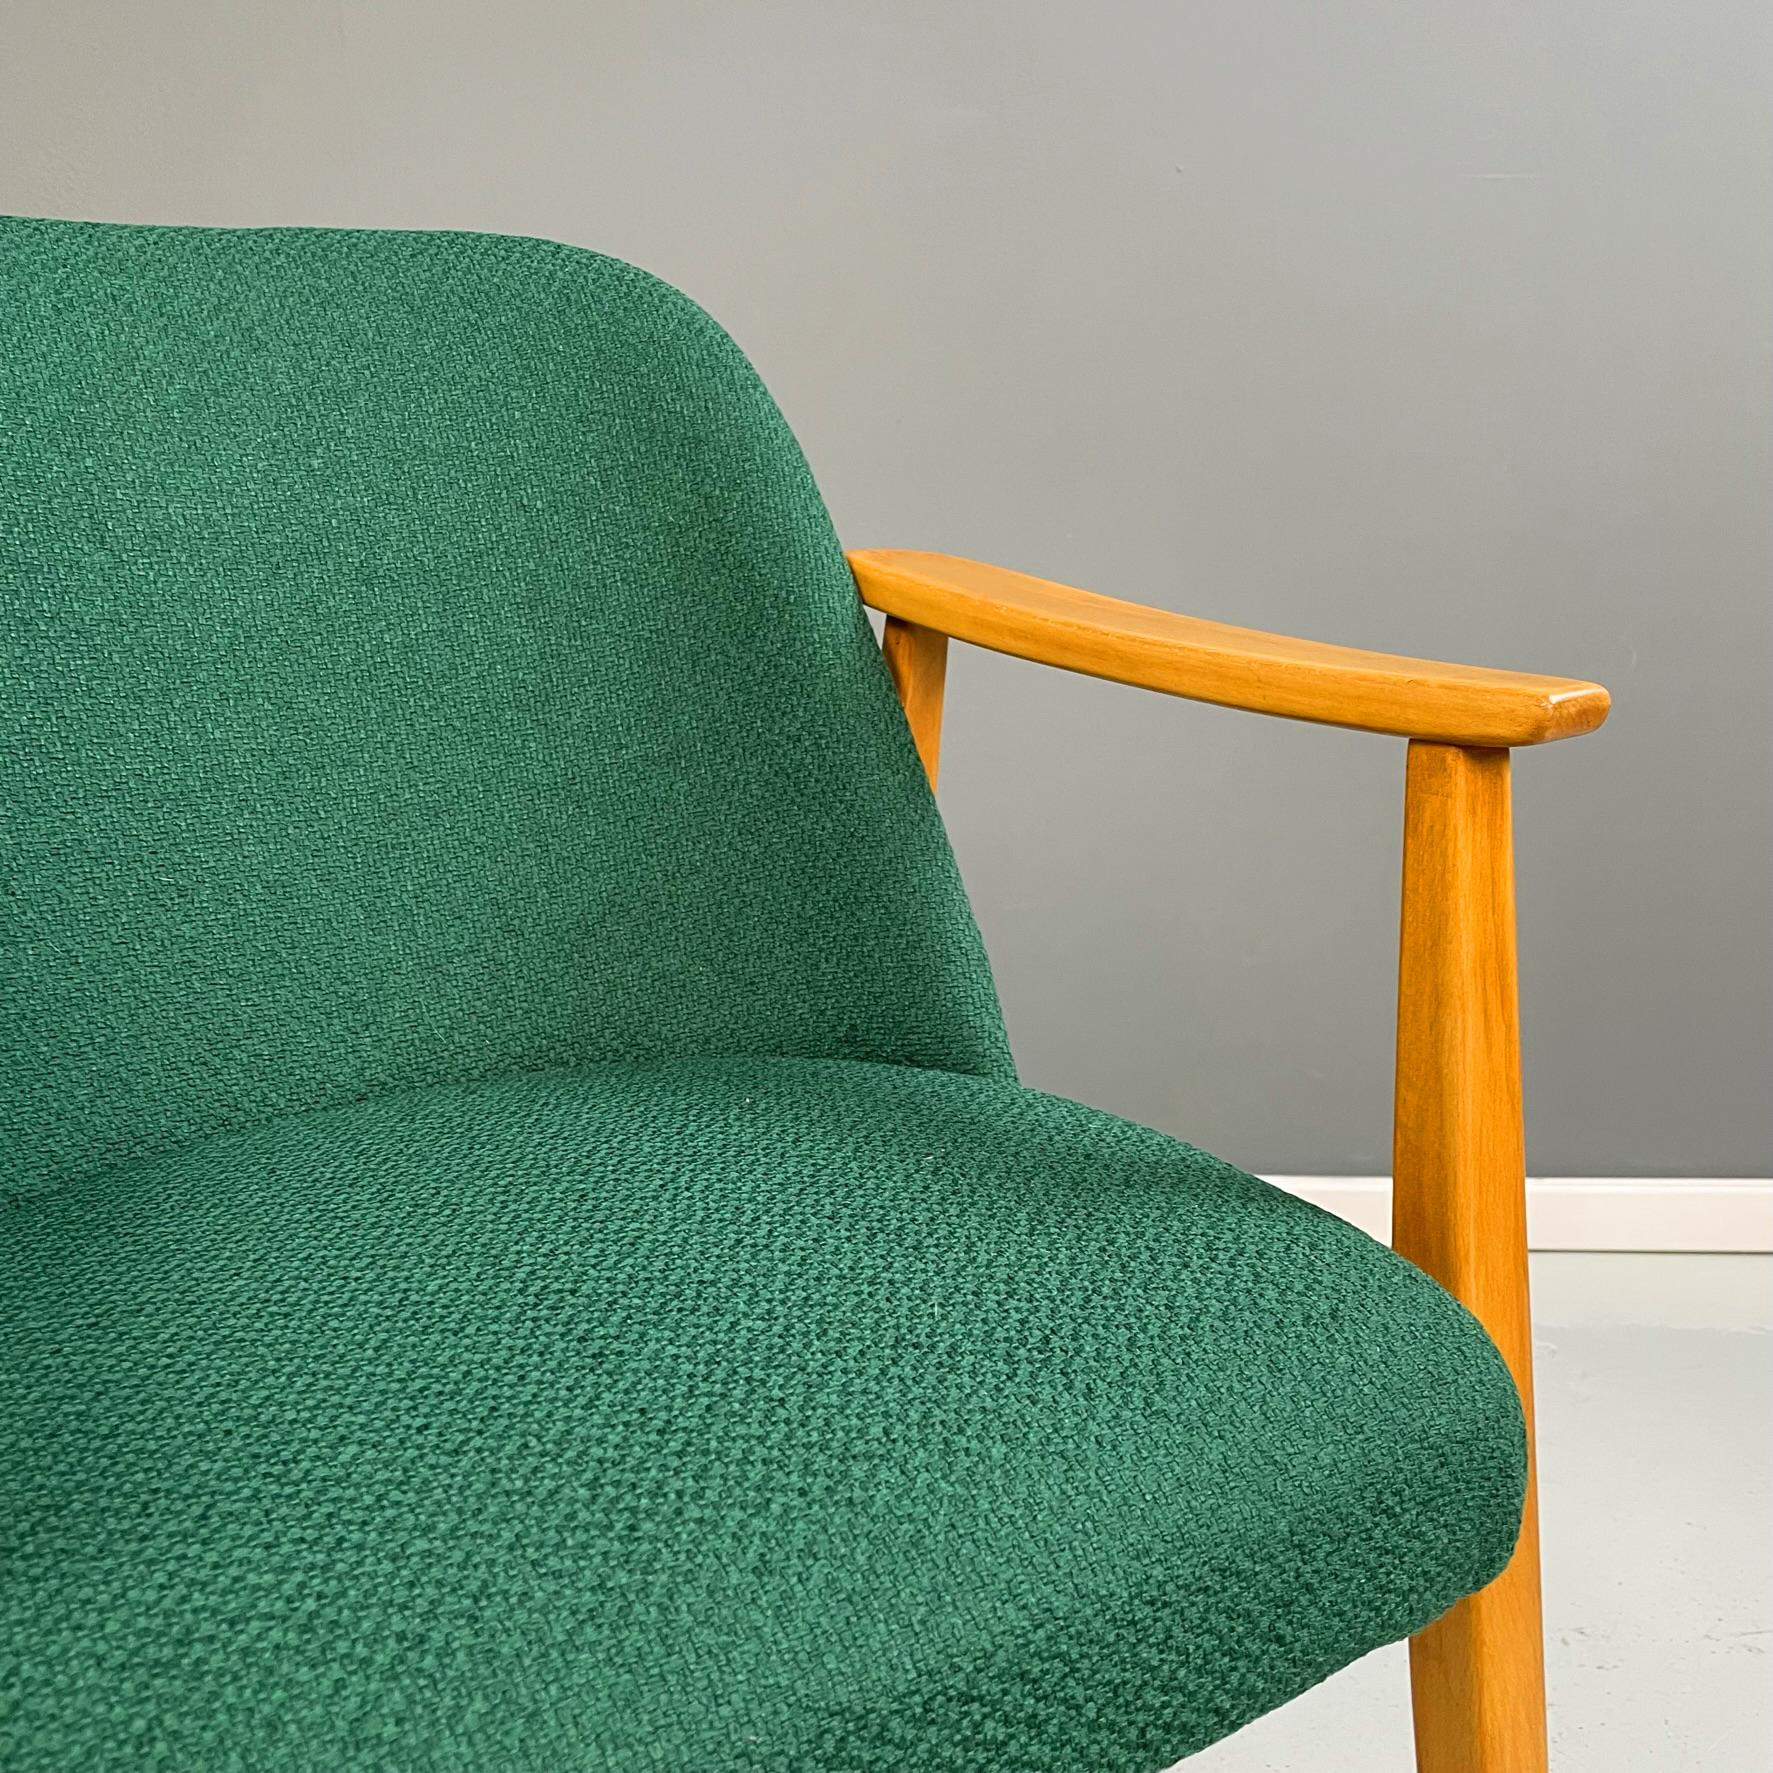 Danish Mid-Century Modern Armchairs in Forest Green Fabric and Wood, 1960s For Sale 5